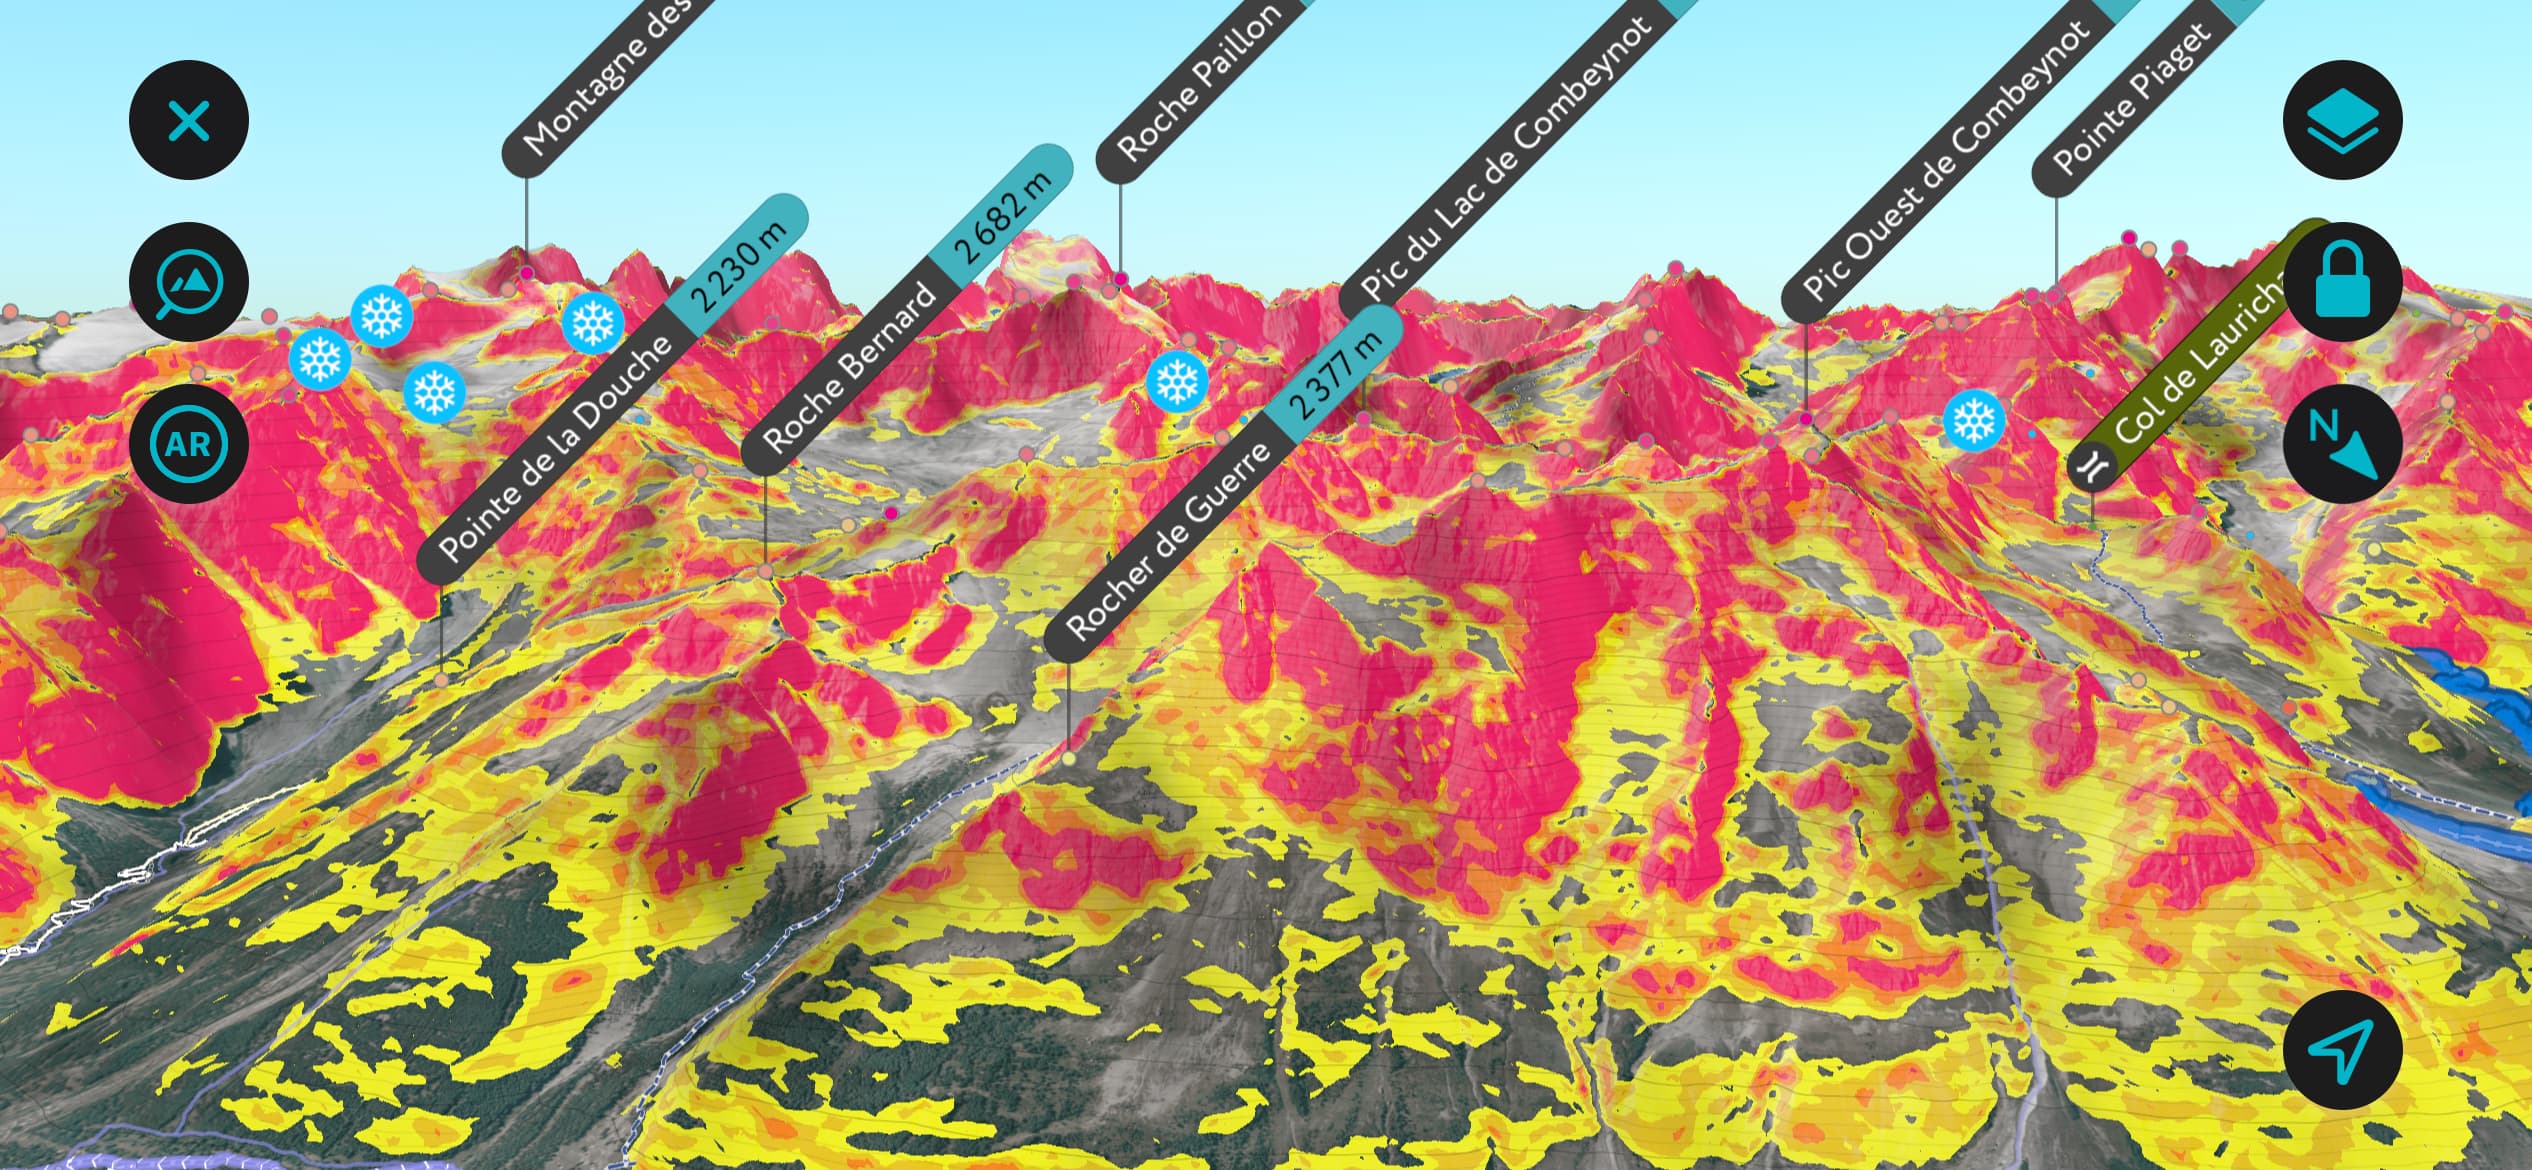 The Secrets to Finding the Best Snow Off-Piste. The North Faces of the Écrins zoomed out using PeakVisor’s pitch tool. The deeper the red colors, the steeper the terrain.